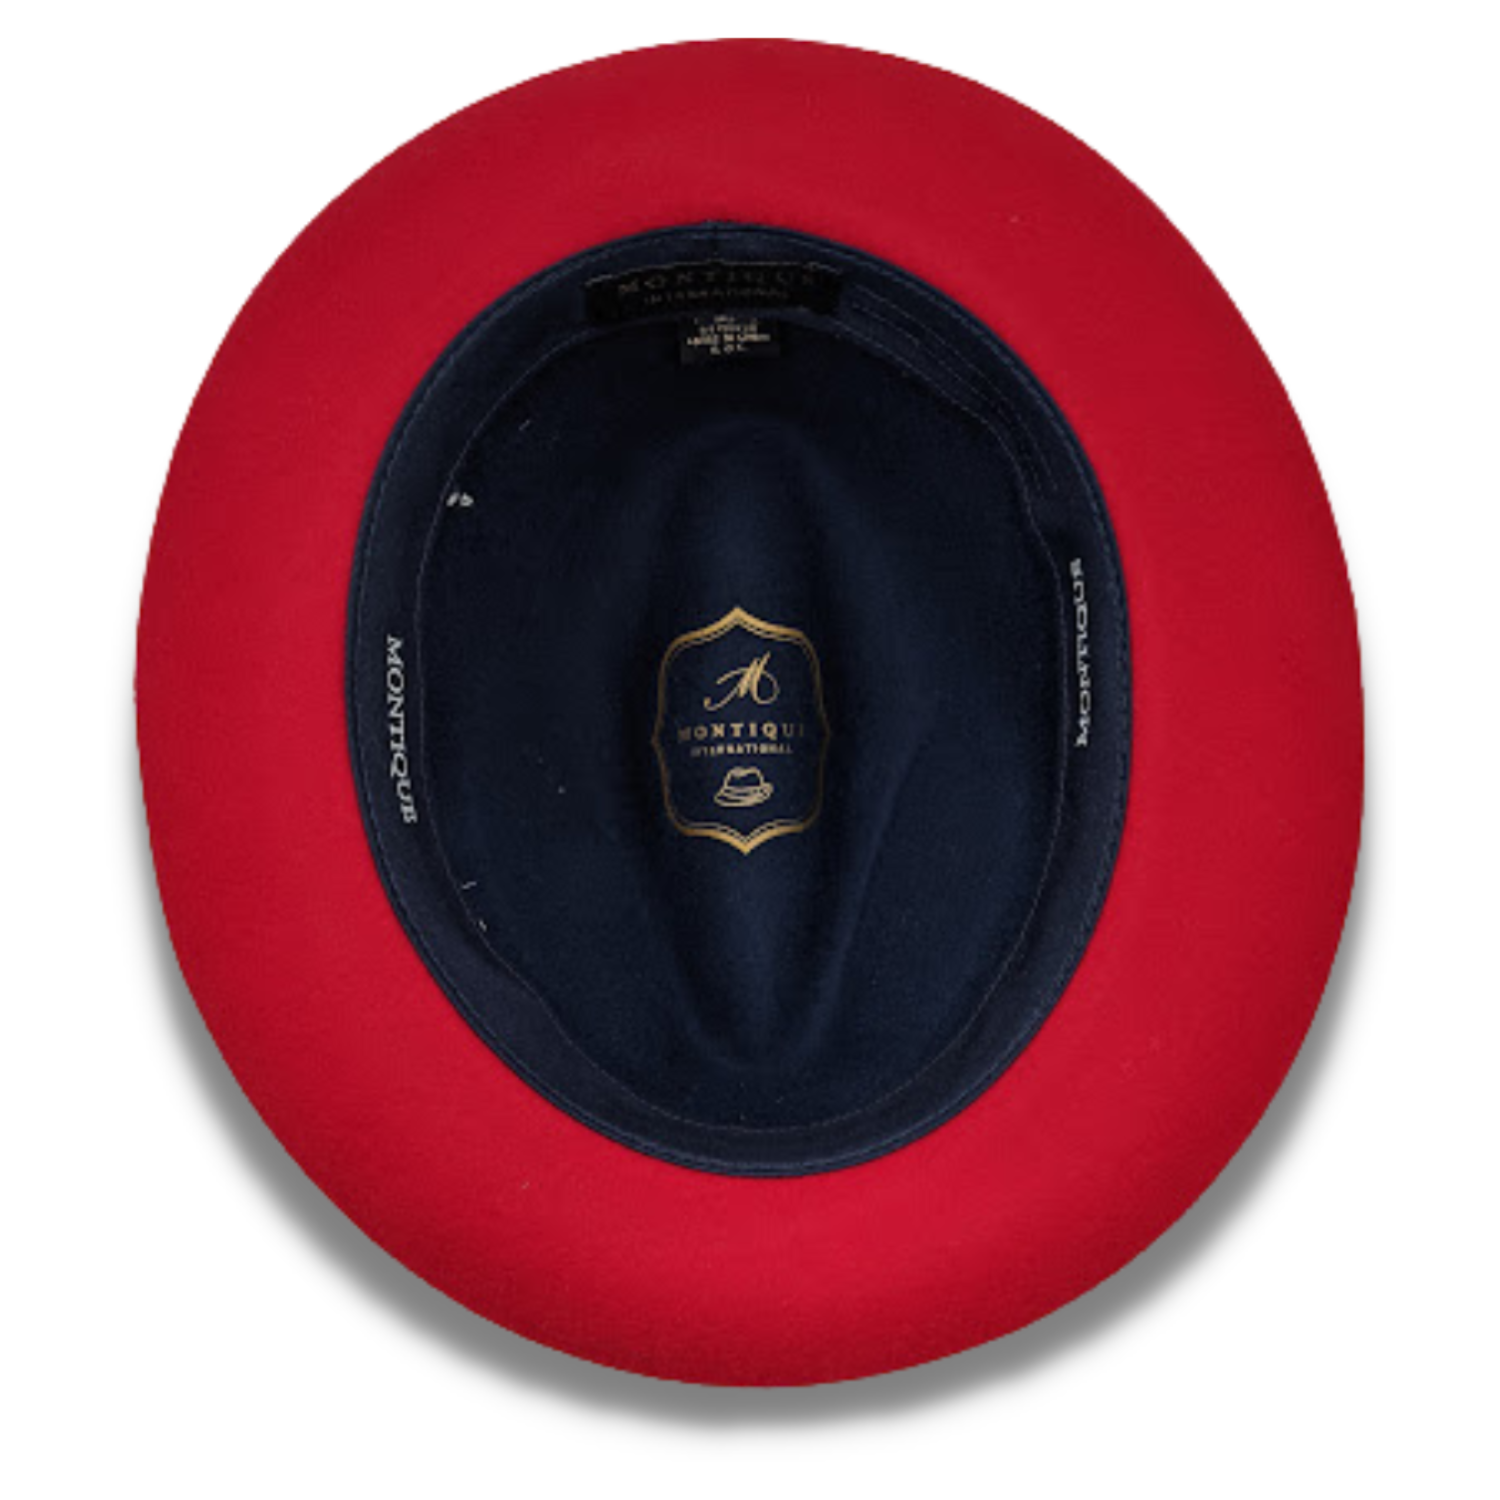 Metallic Wide-Brimmed Hat 331881 Red - Fit Rite Fashions – fitrite fashions